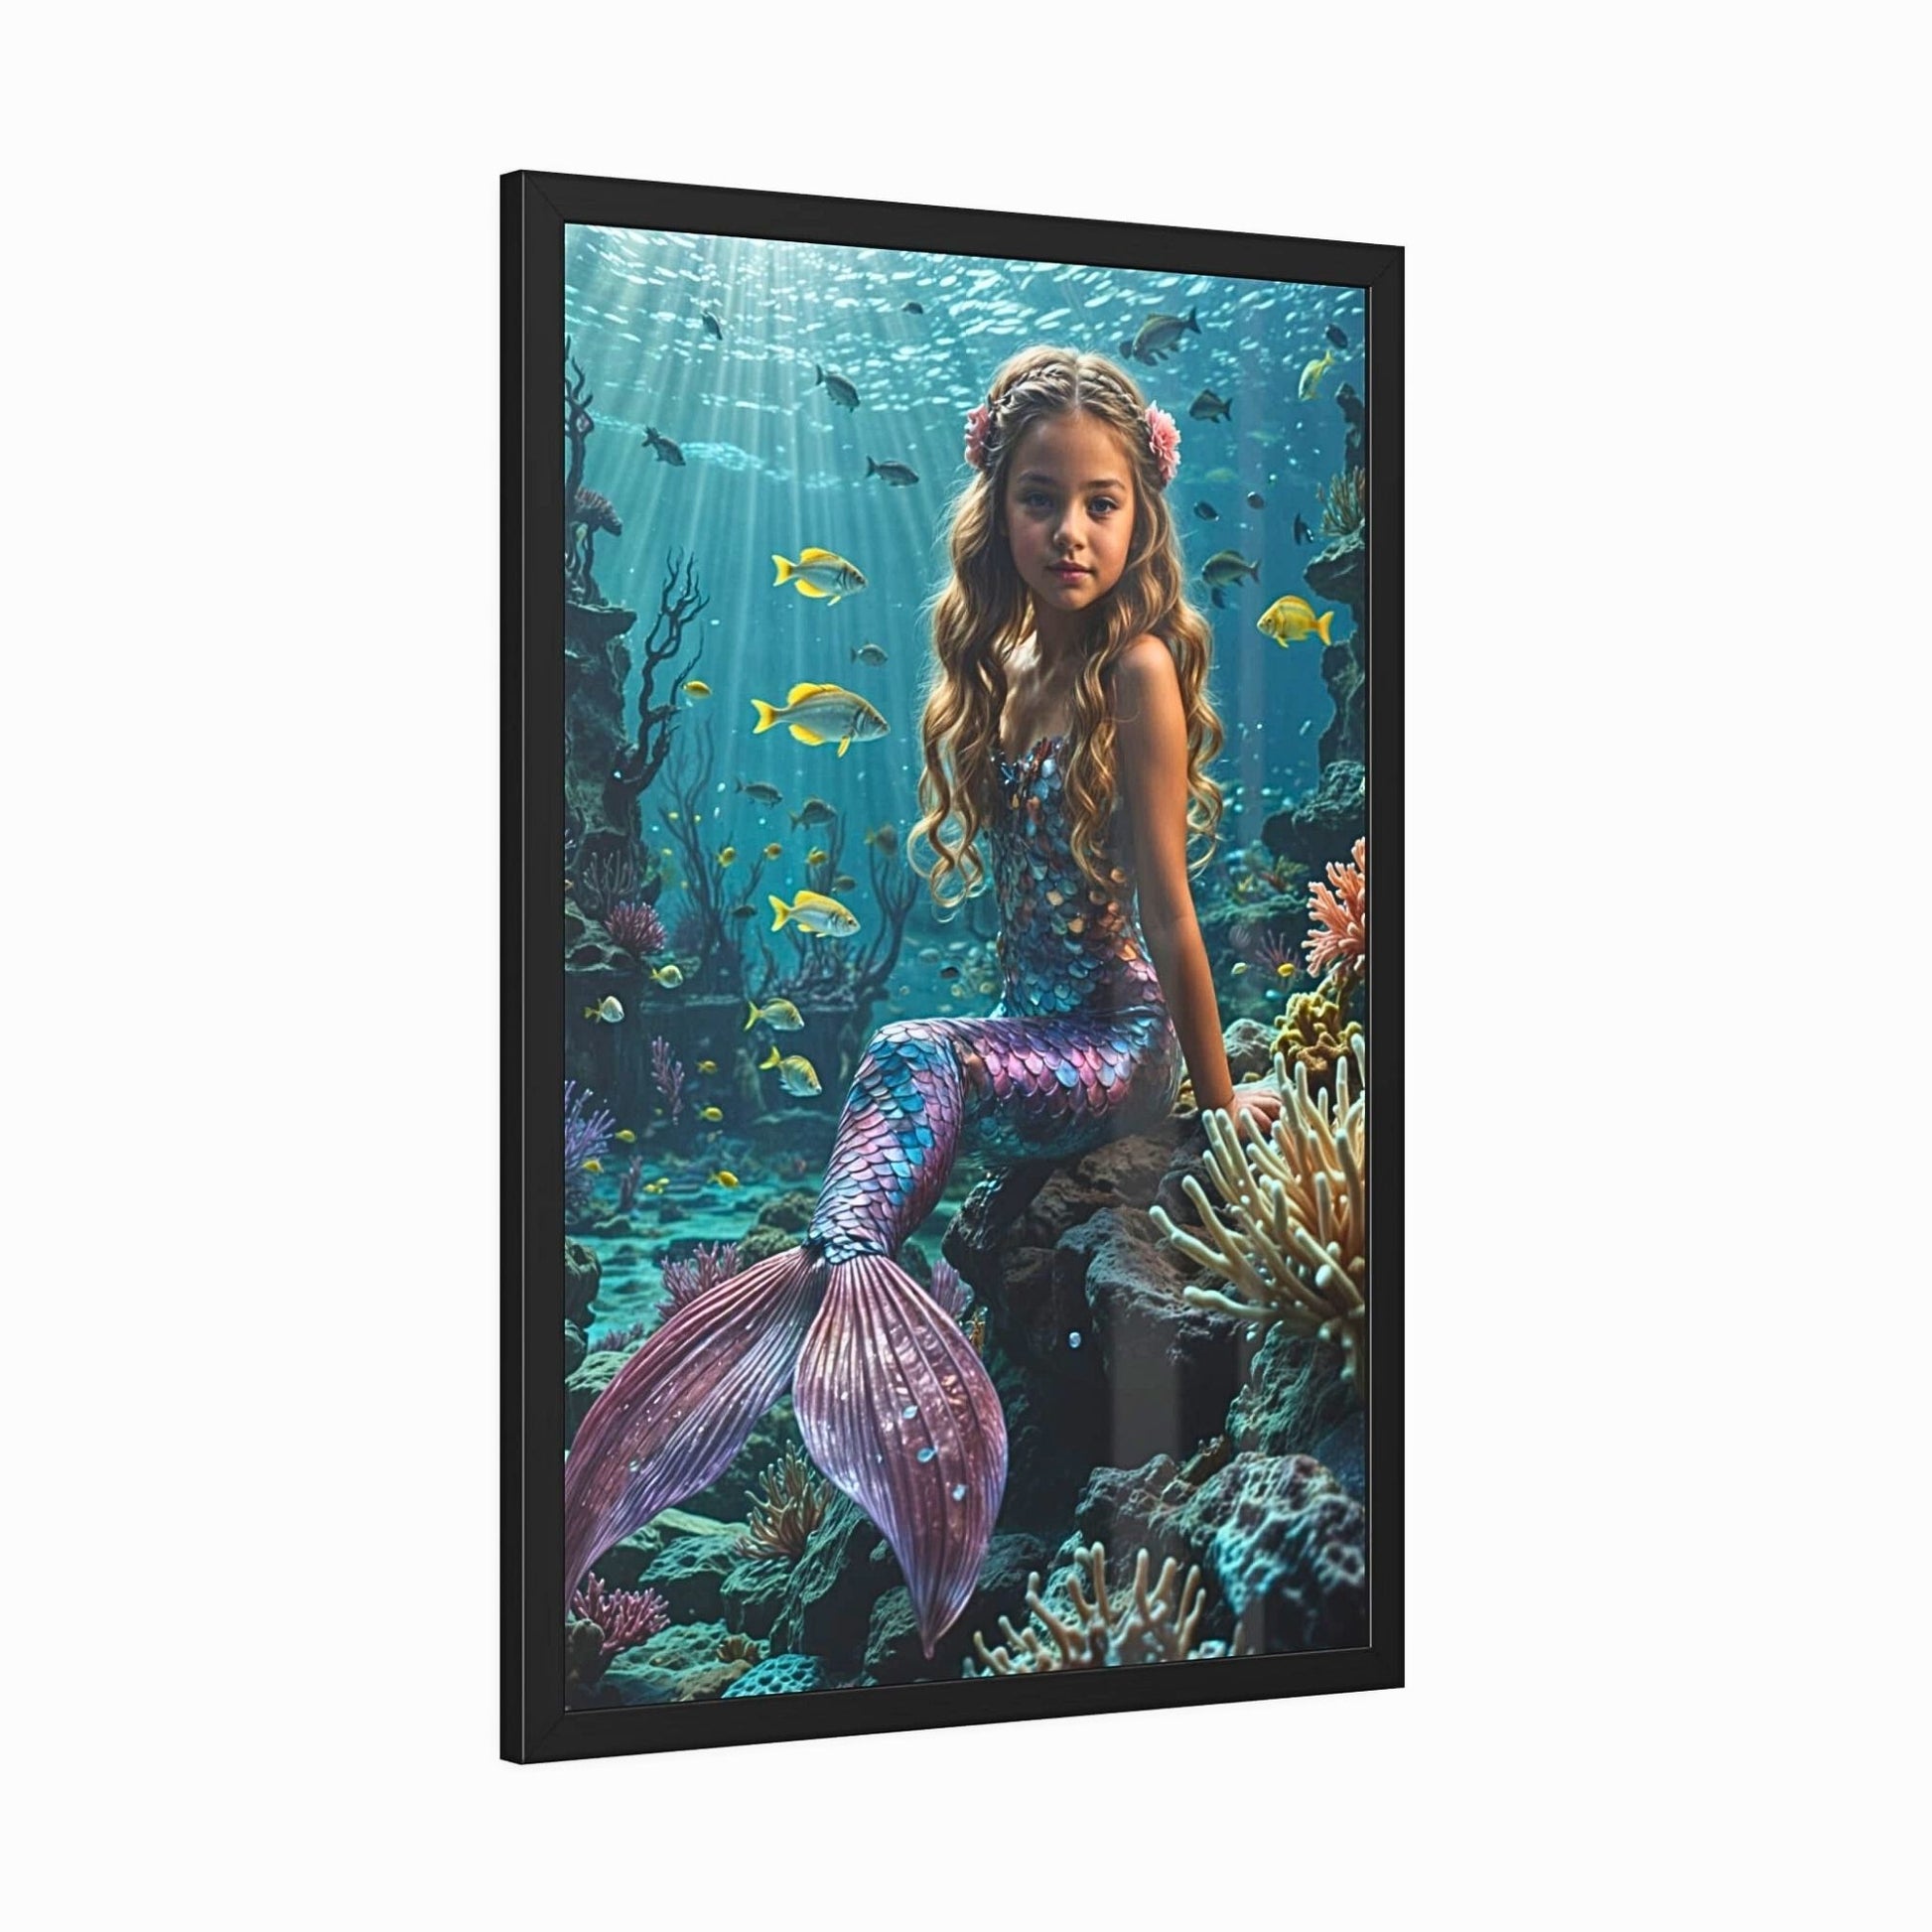 Create a one-of-a-kind Custom Mermaid Portrait from Photo, ideal for a Personalized Princess Mermaid Portrait for your daughter's Birthday. Turn any photo into stunning Wall Art, perfect for daughters, sisters, moms, and girlfriends. These unique Custom Mermaid Art portraits make unforgettable gifts, transforming special moments into magical keepsakes. Celebrate any occasion with a personalized mermaid treasure.